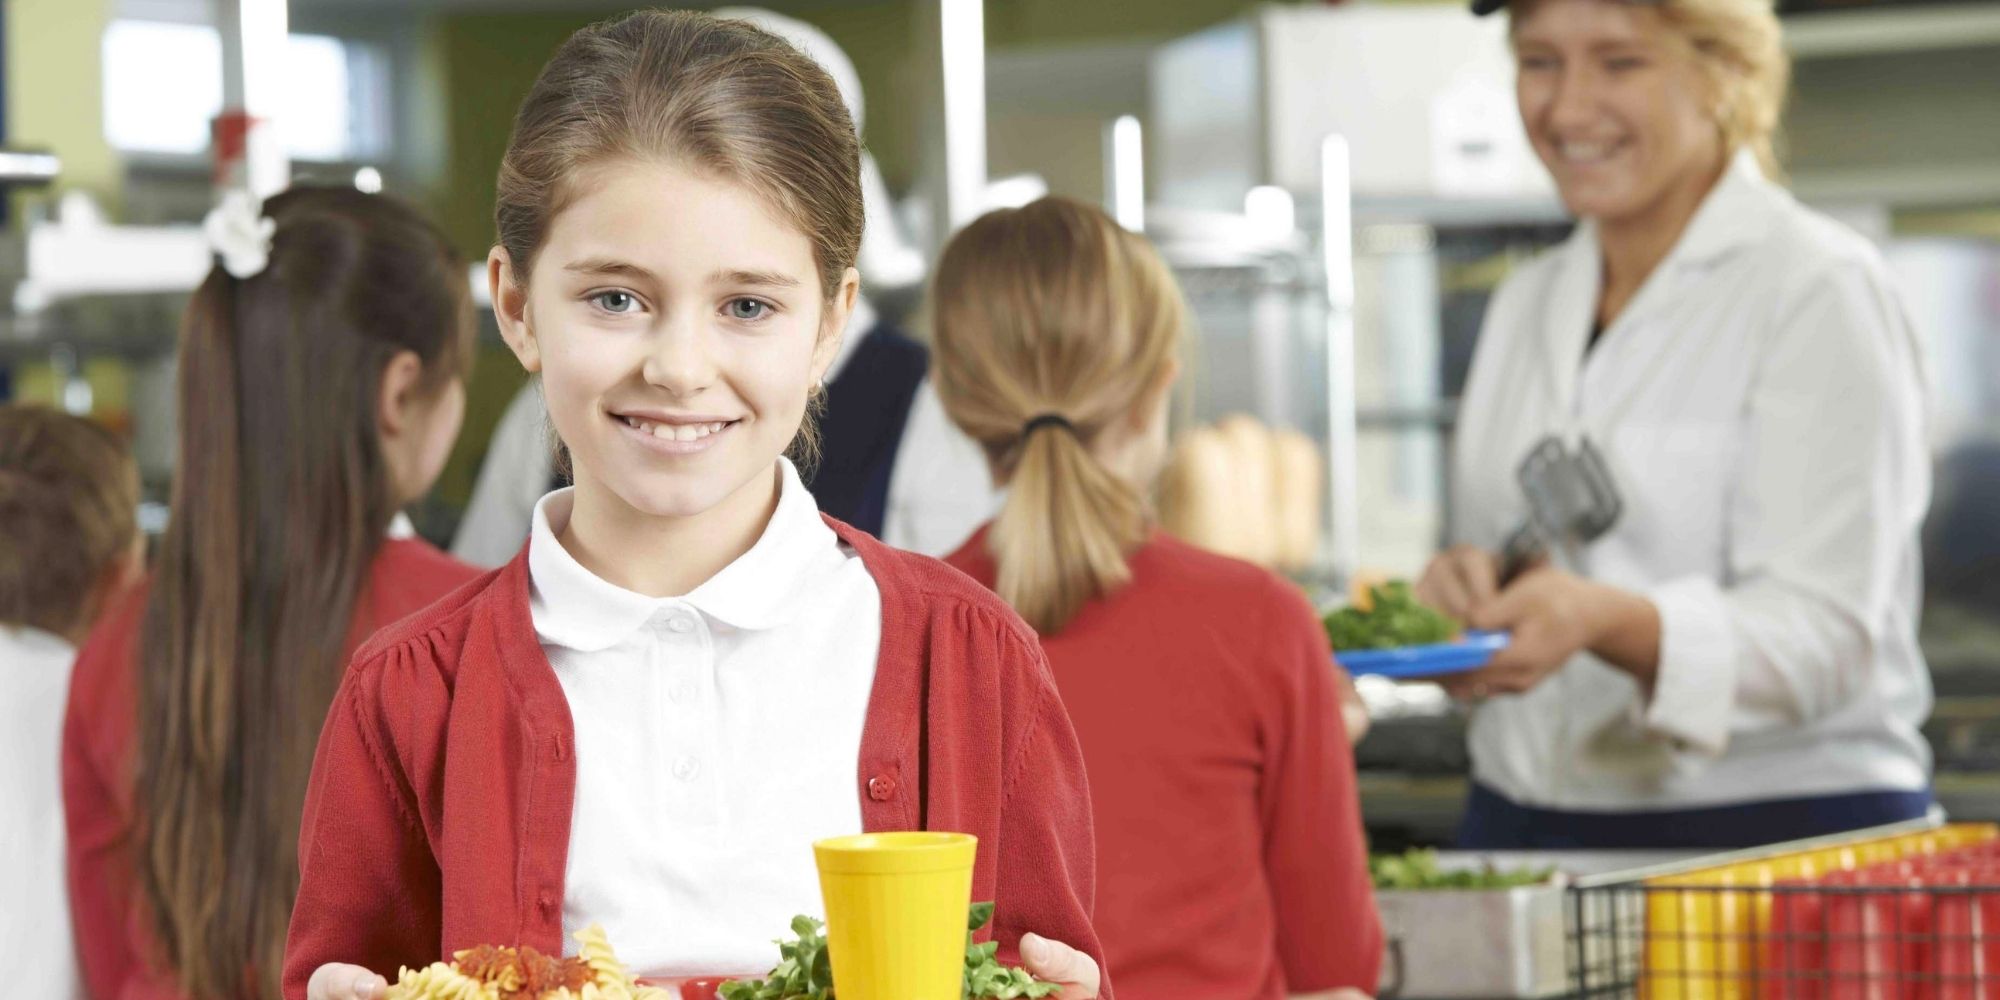 Food Safety For Schools